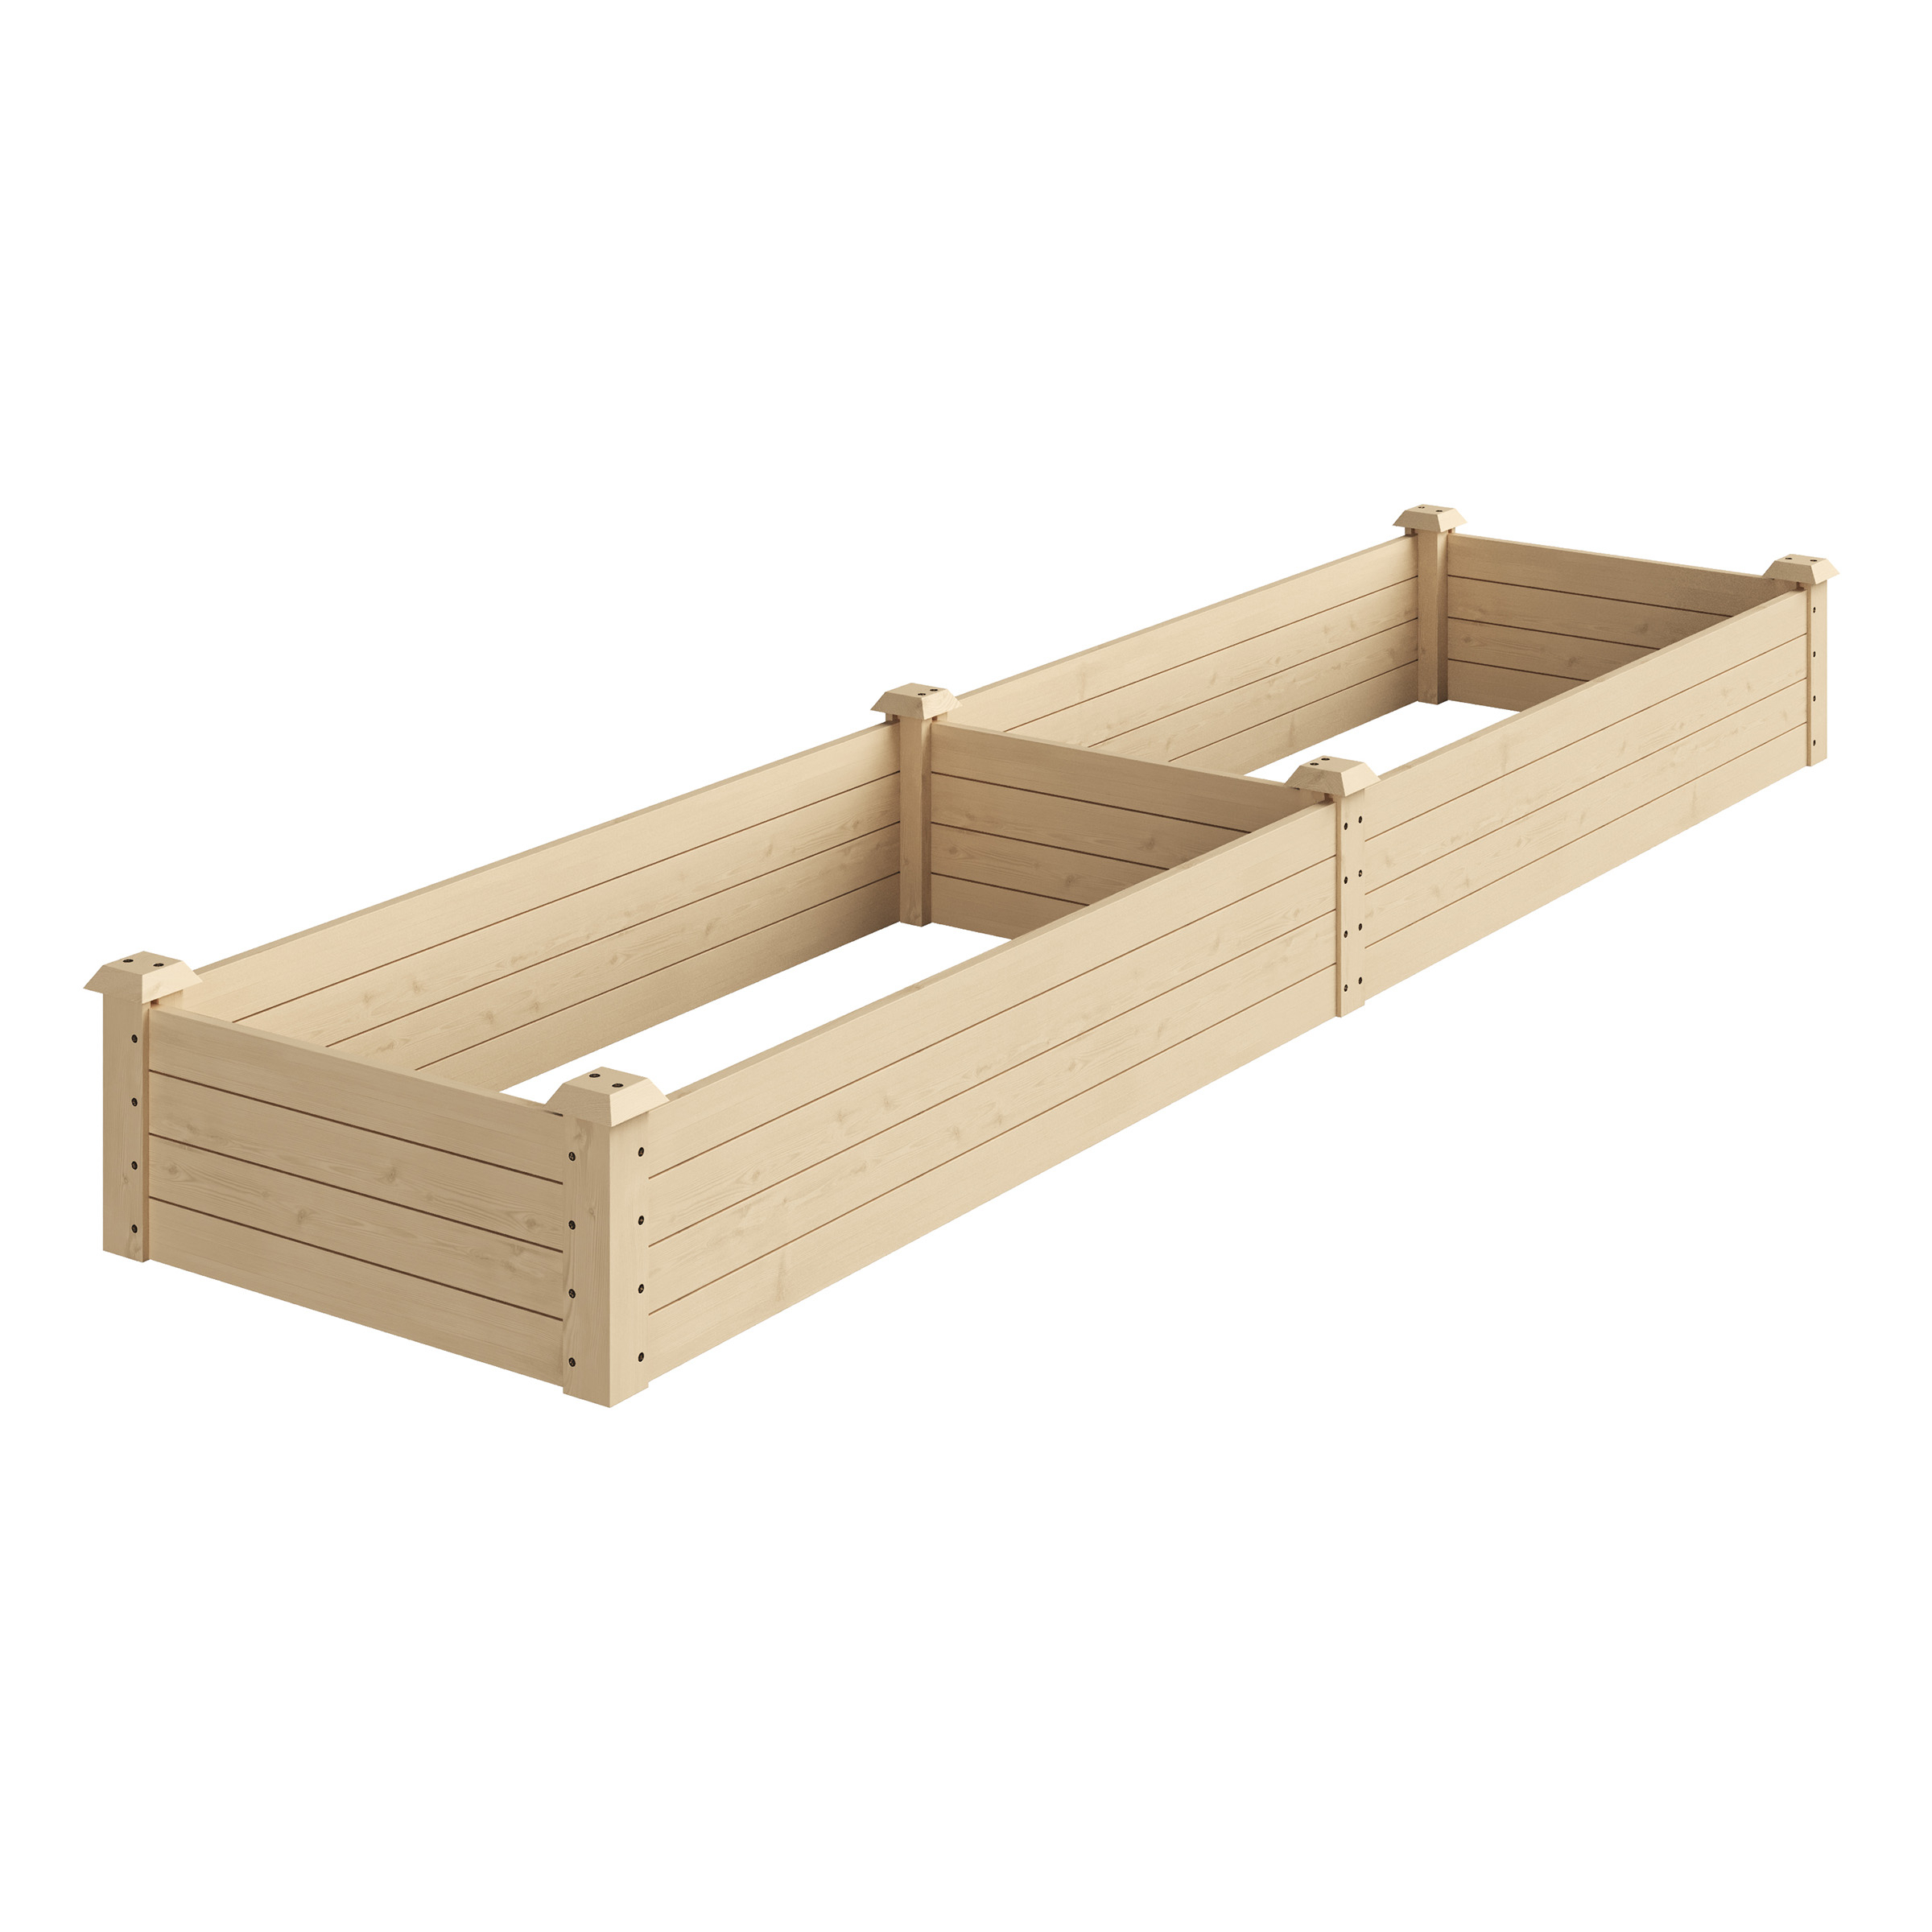 Raised Garden Bed - 8ftx2ft Wood Planter Box With Open Bottom - Easy-to-Assemble Elevated Flower Bed For Vegetables Or Plants